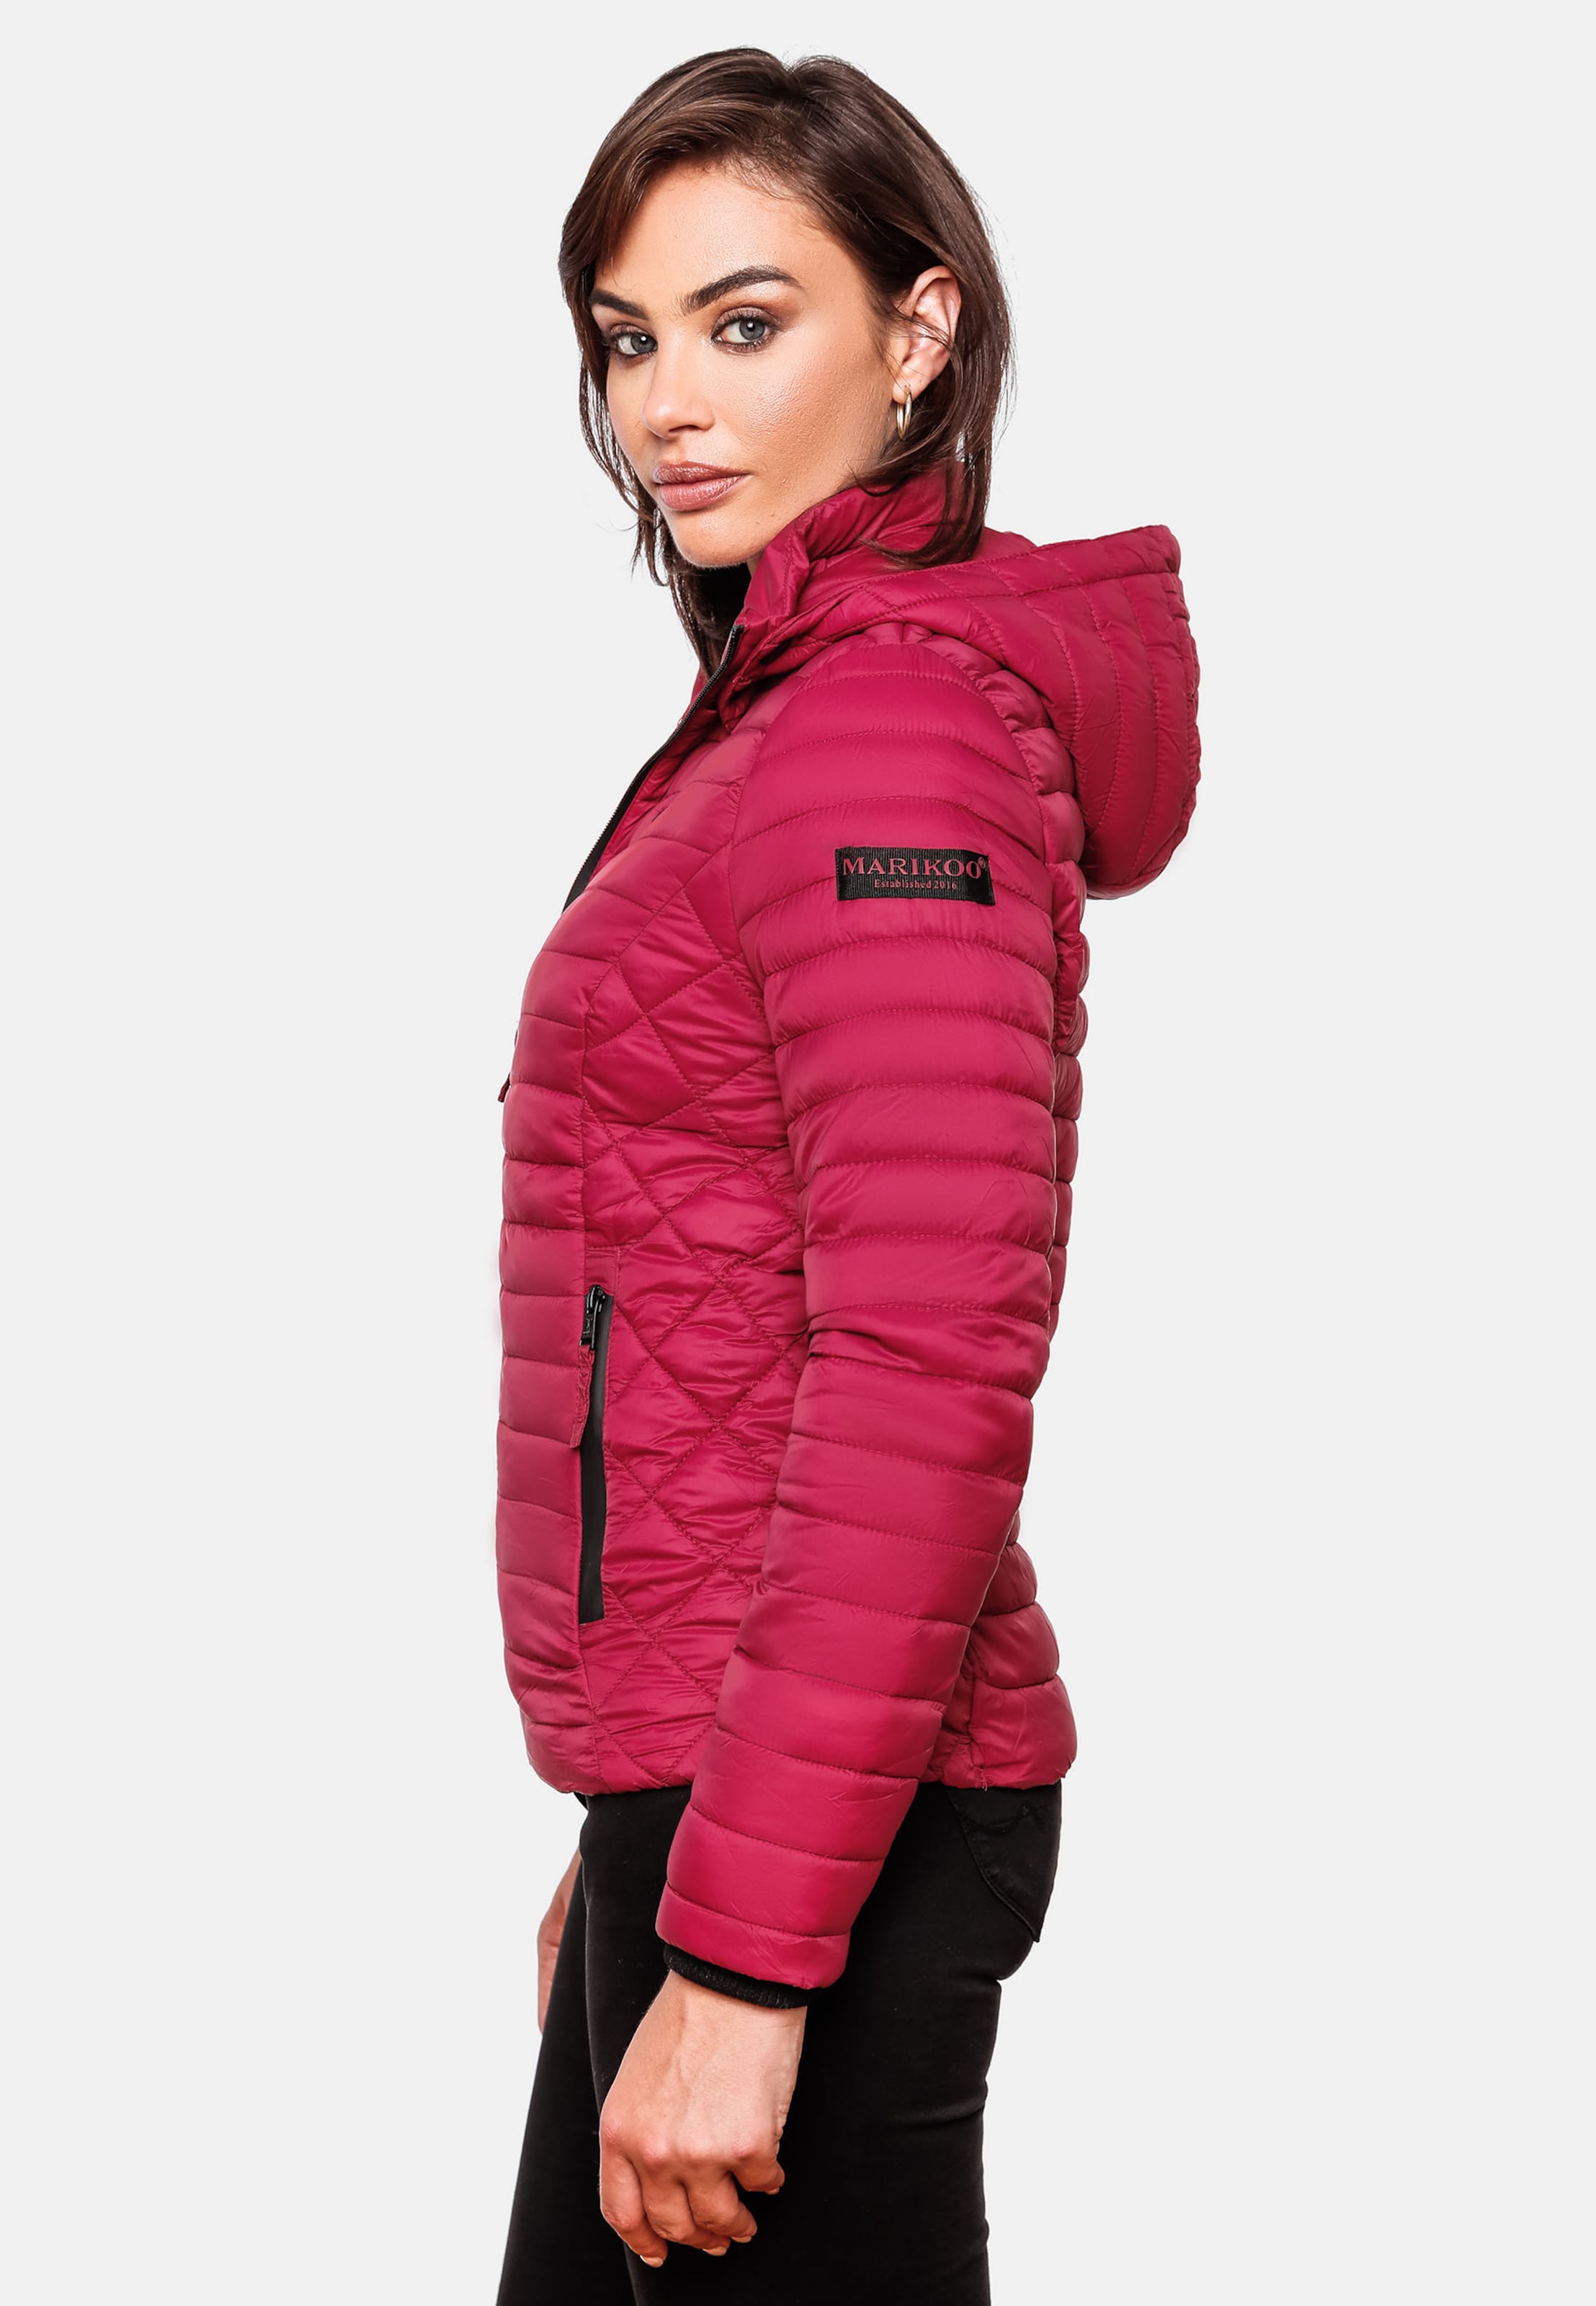 | \'Samtpfote\' MARIKOO in Steppjacke ABOUT Pink YOU